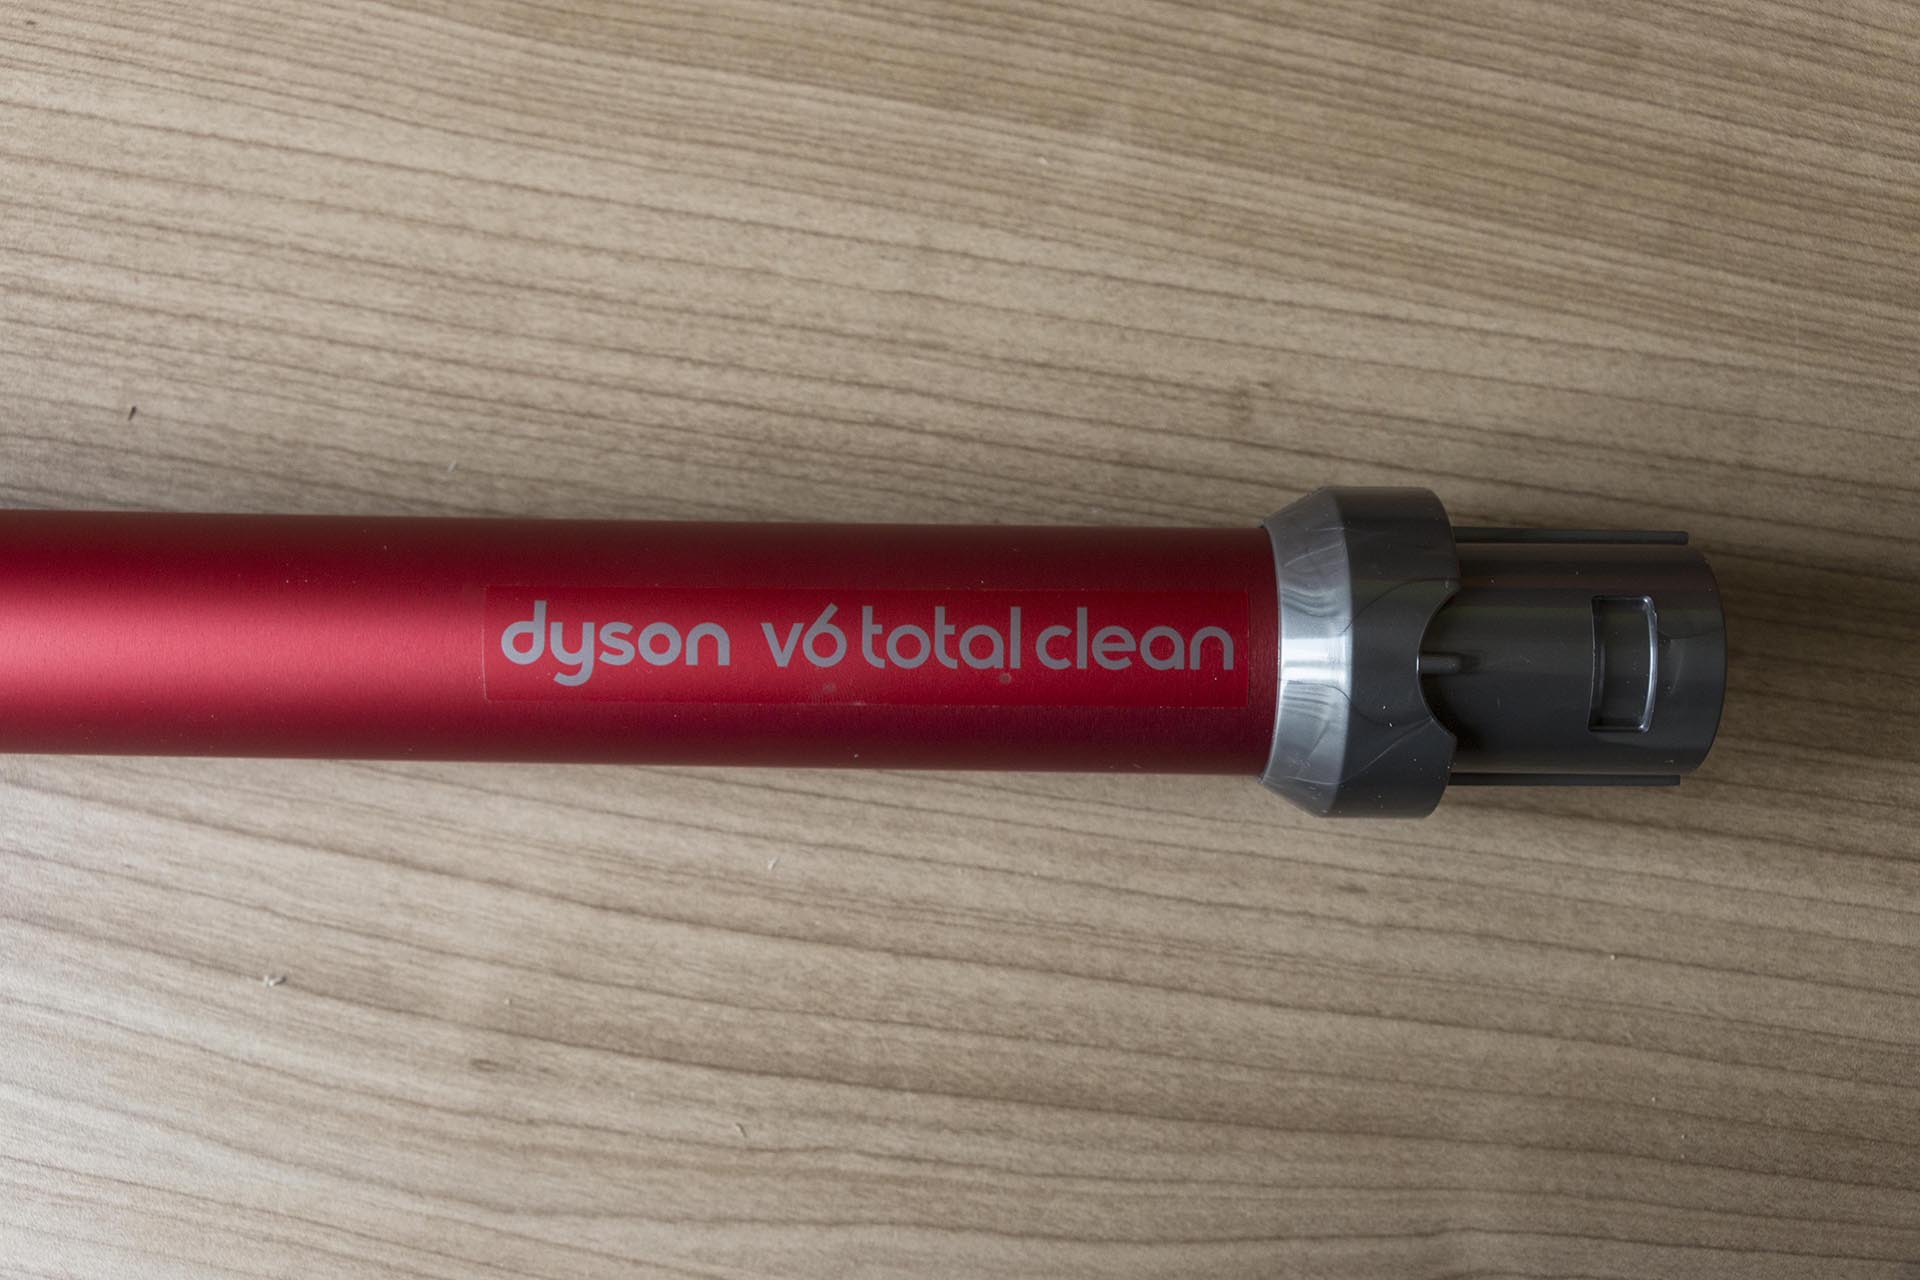 Dyson V6 Total Clean_MG_9424